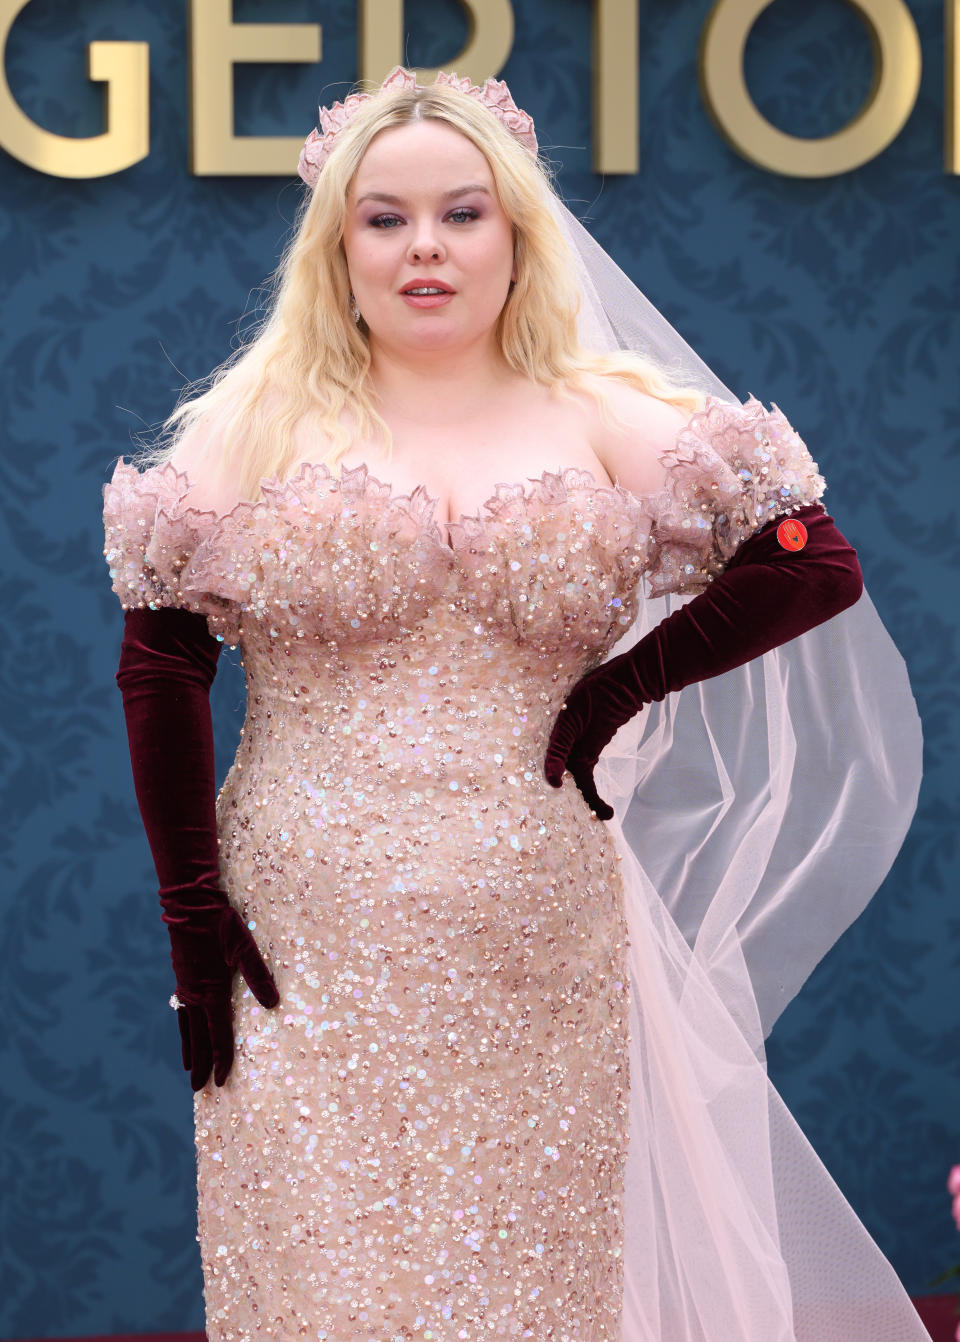 Nicola Coughlan at a red carpet event, wearing an off-shoulder, sequined gown with sheer details and long velvet gloves